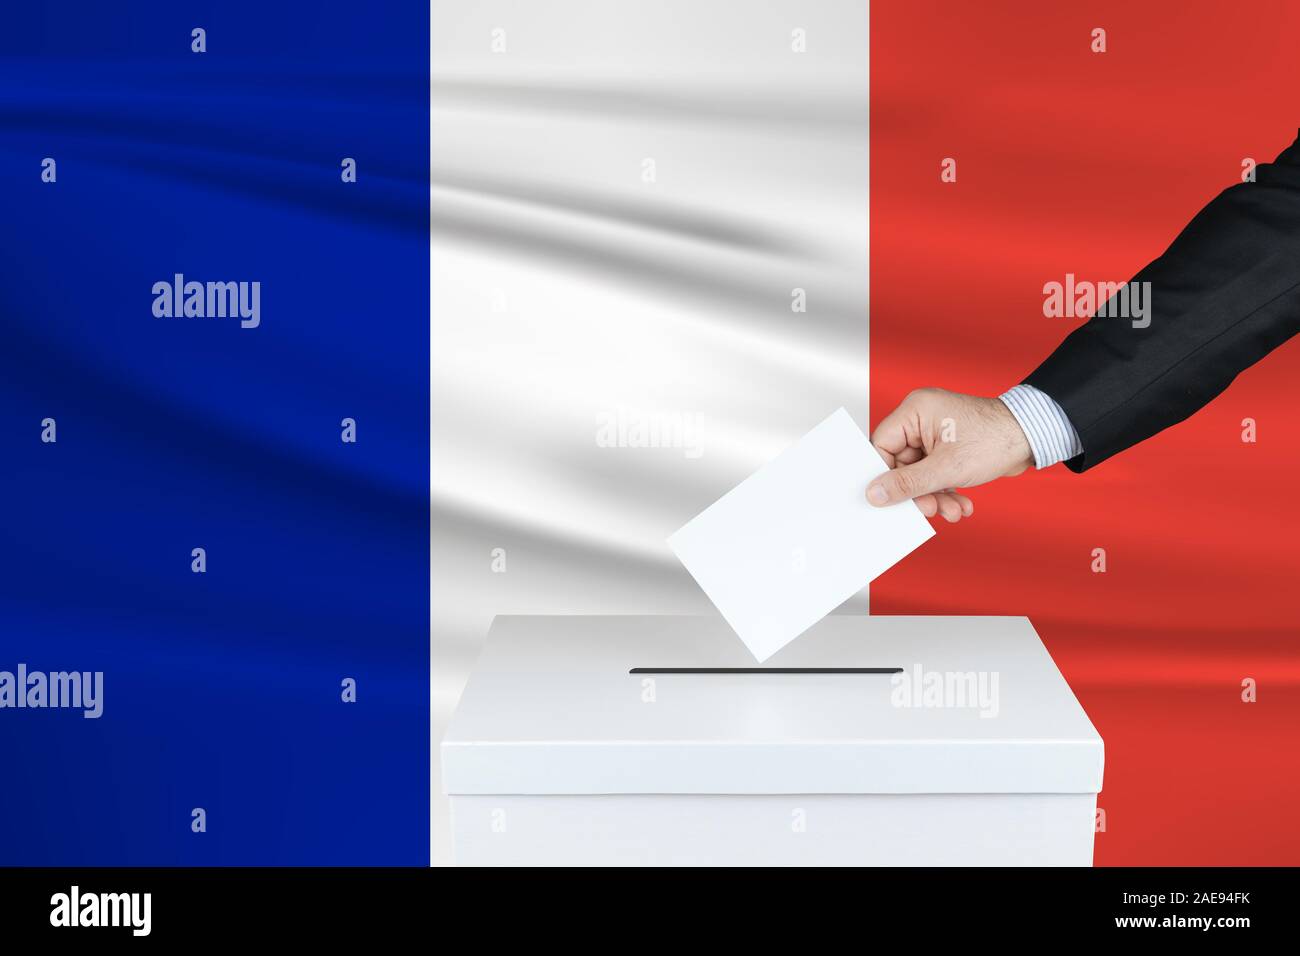 Election in Guadeloupe. The hand of man putting his vote in the ballot box. Waved Guadeloupe flag on background. Stock Photo